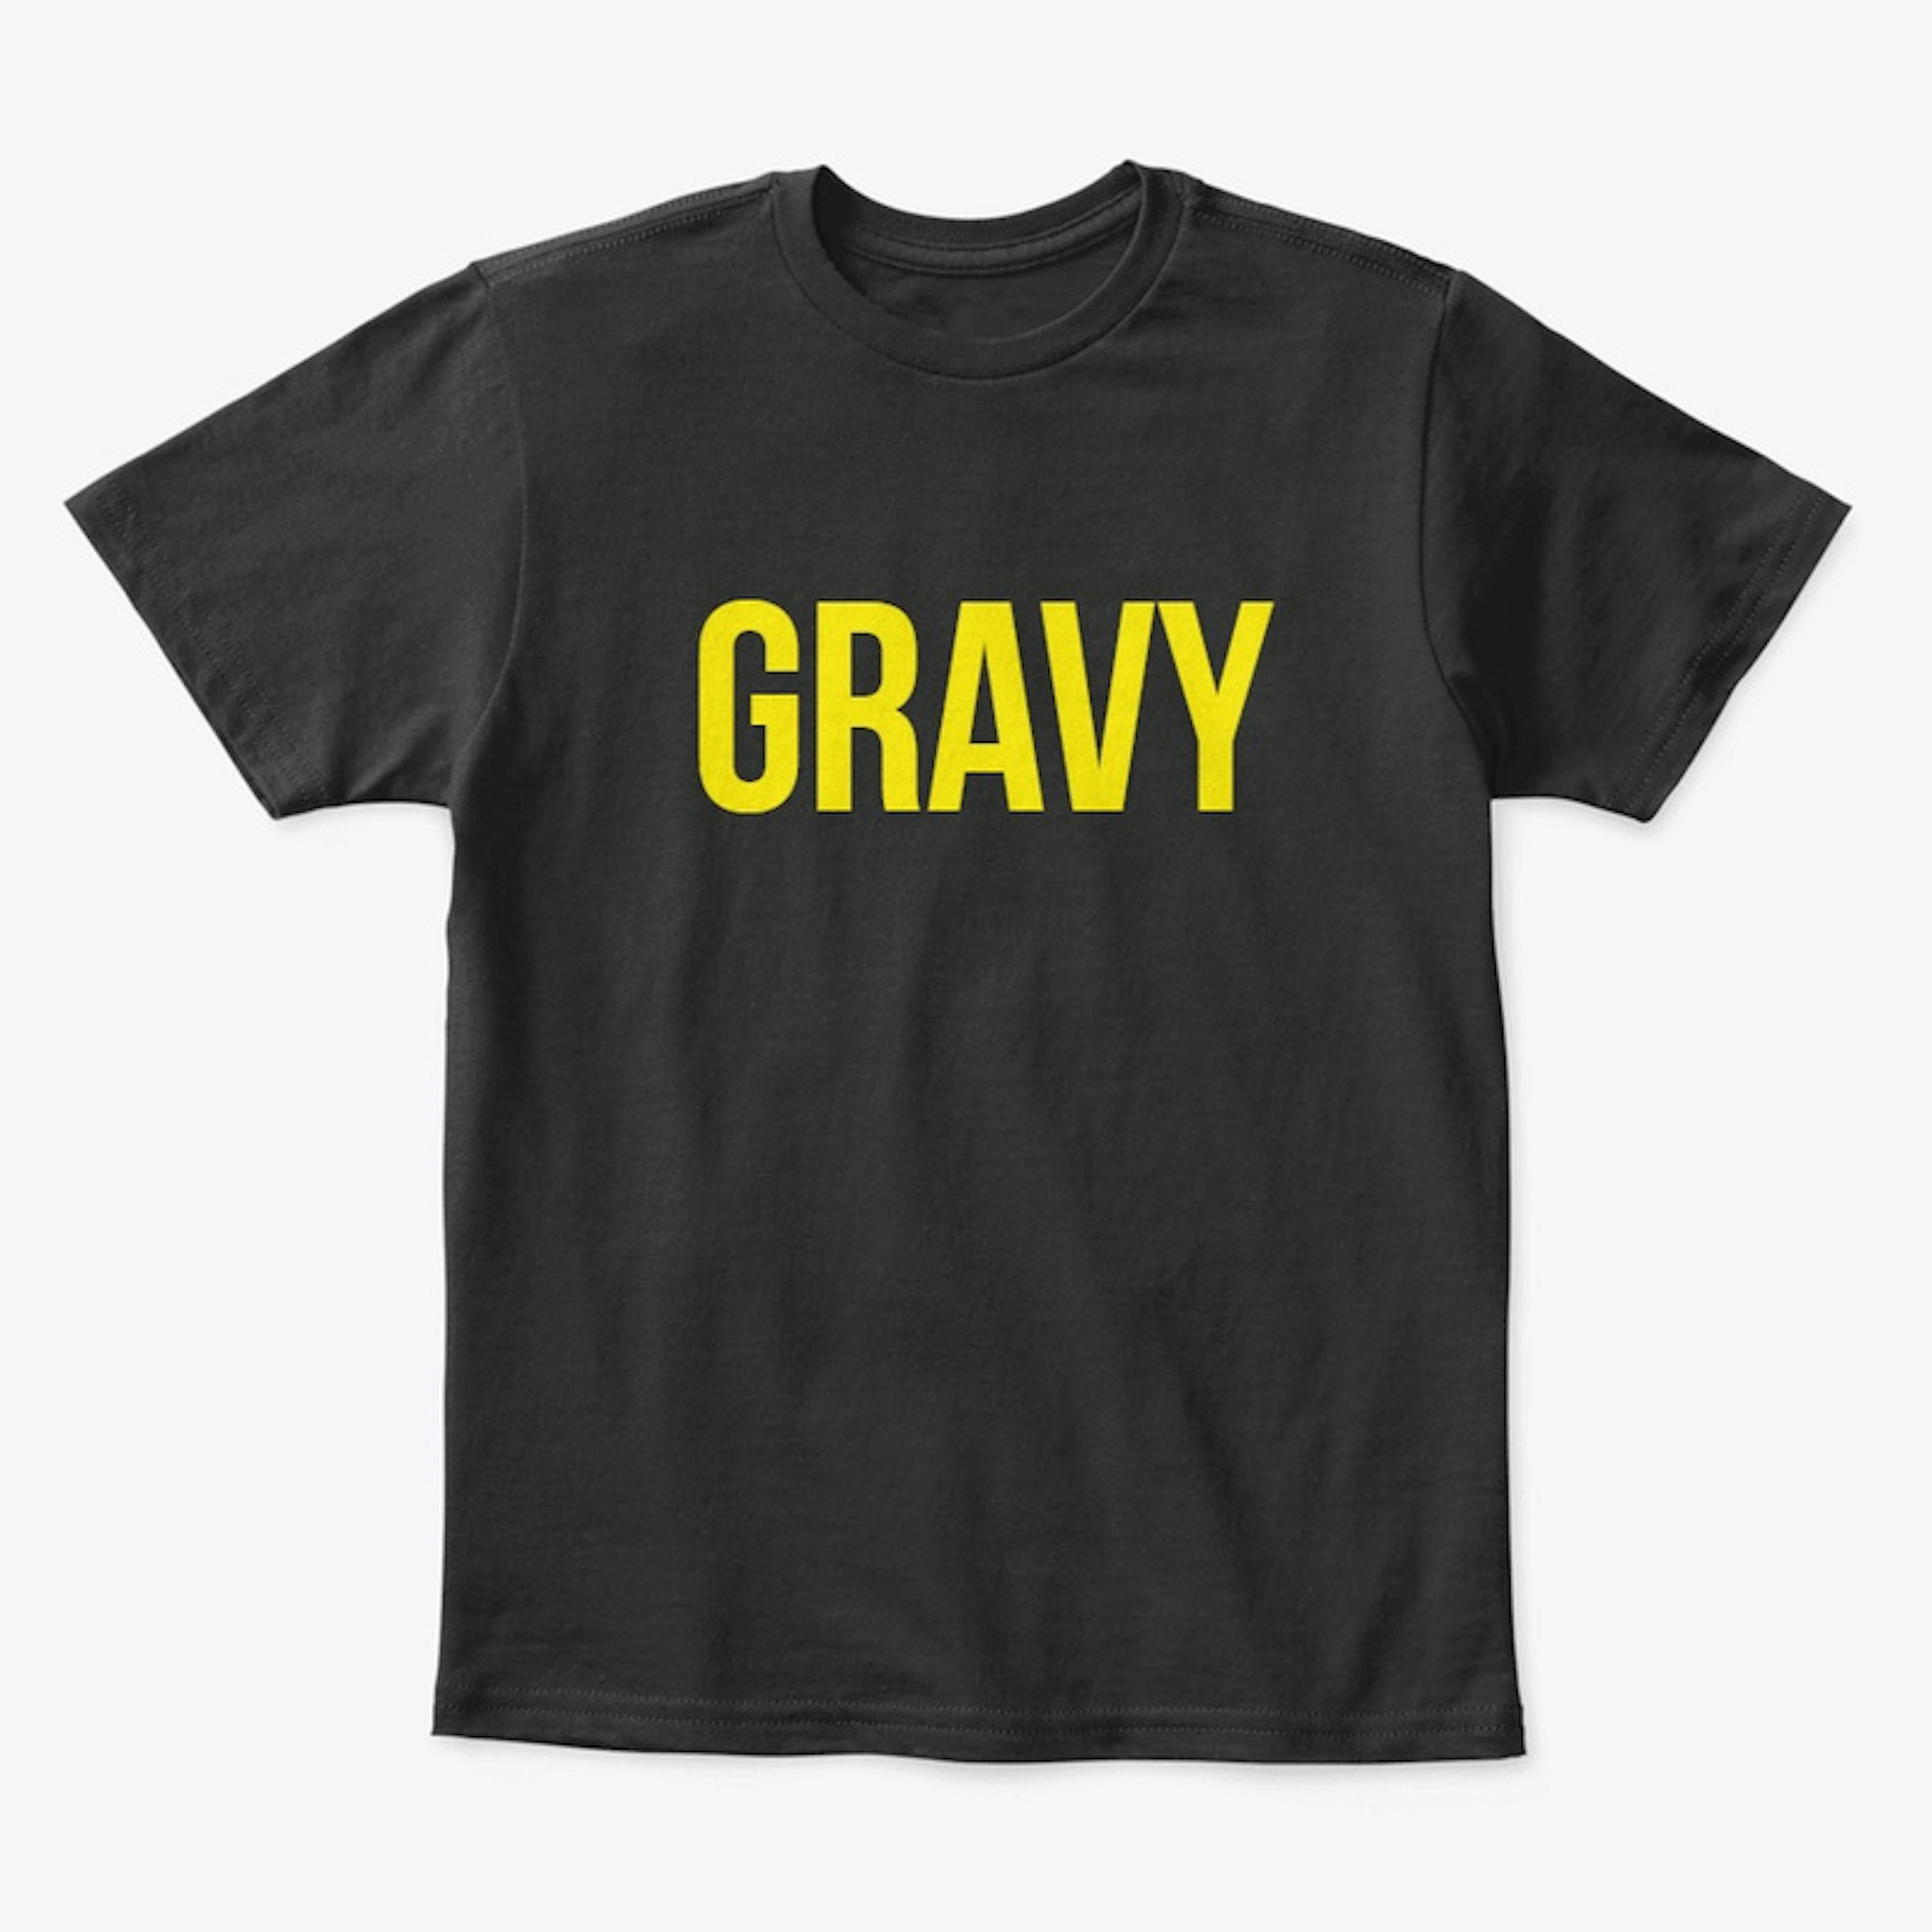 The Sauce and Gravy Channel Kid's Tee